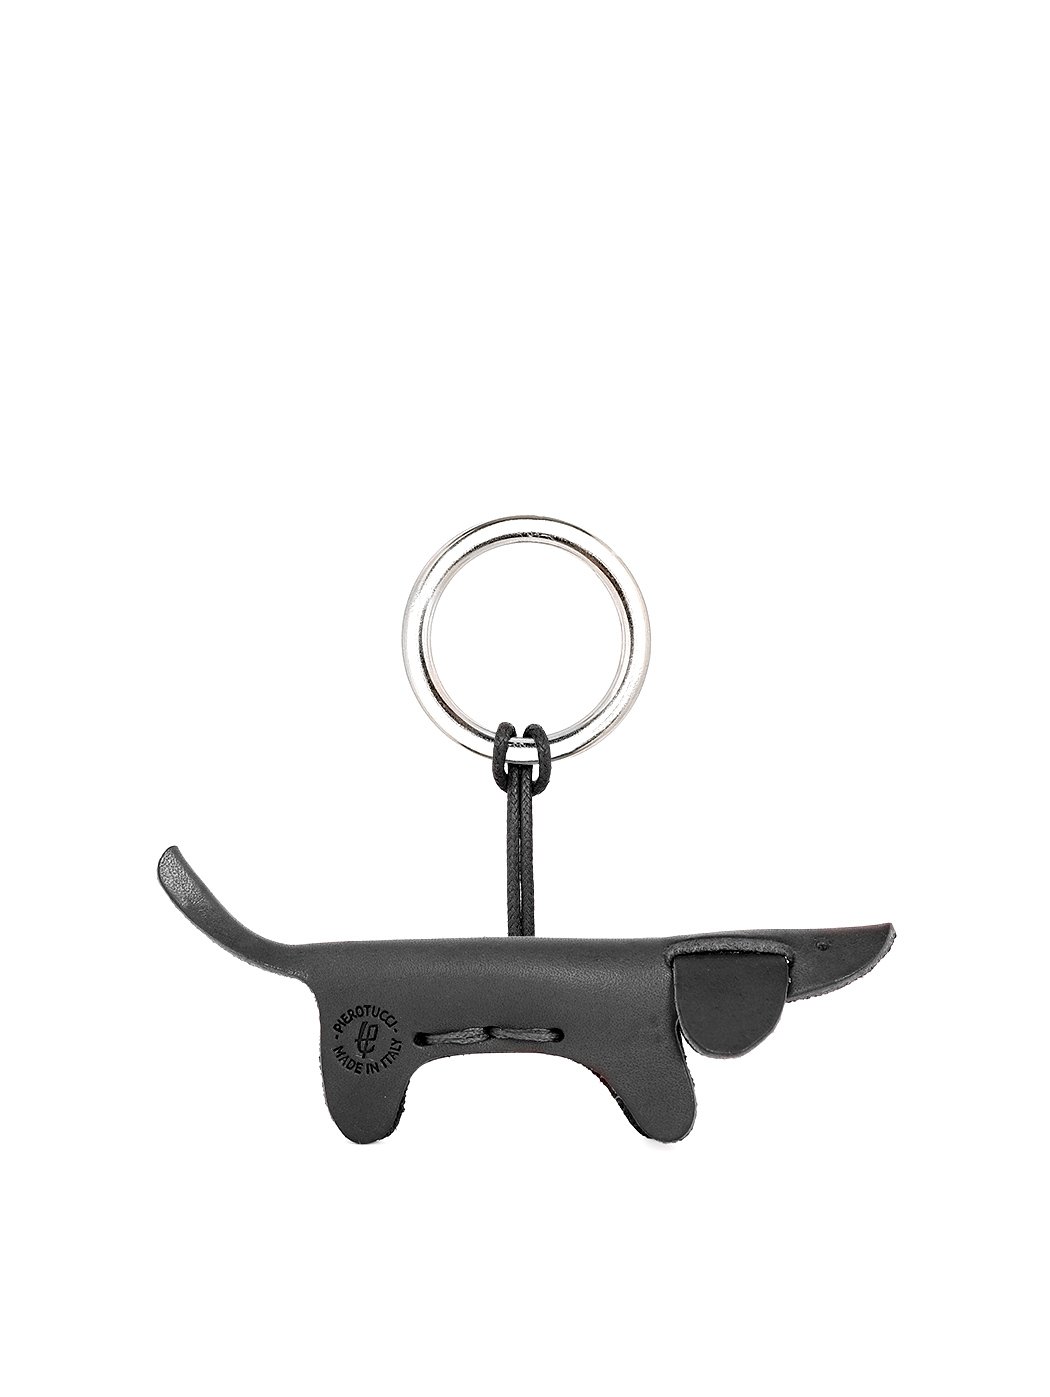 Keychain Ring Holder 30mm with Chain 1